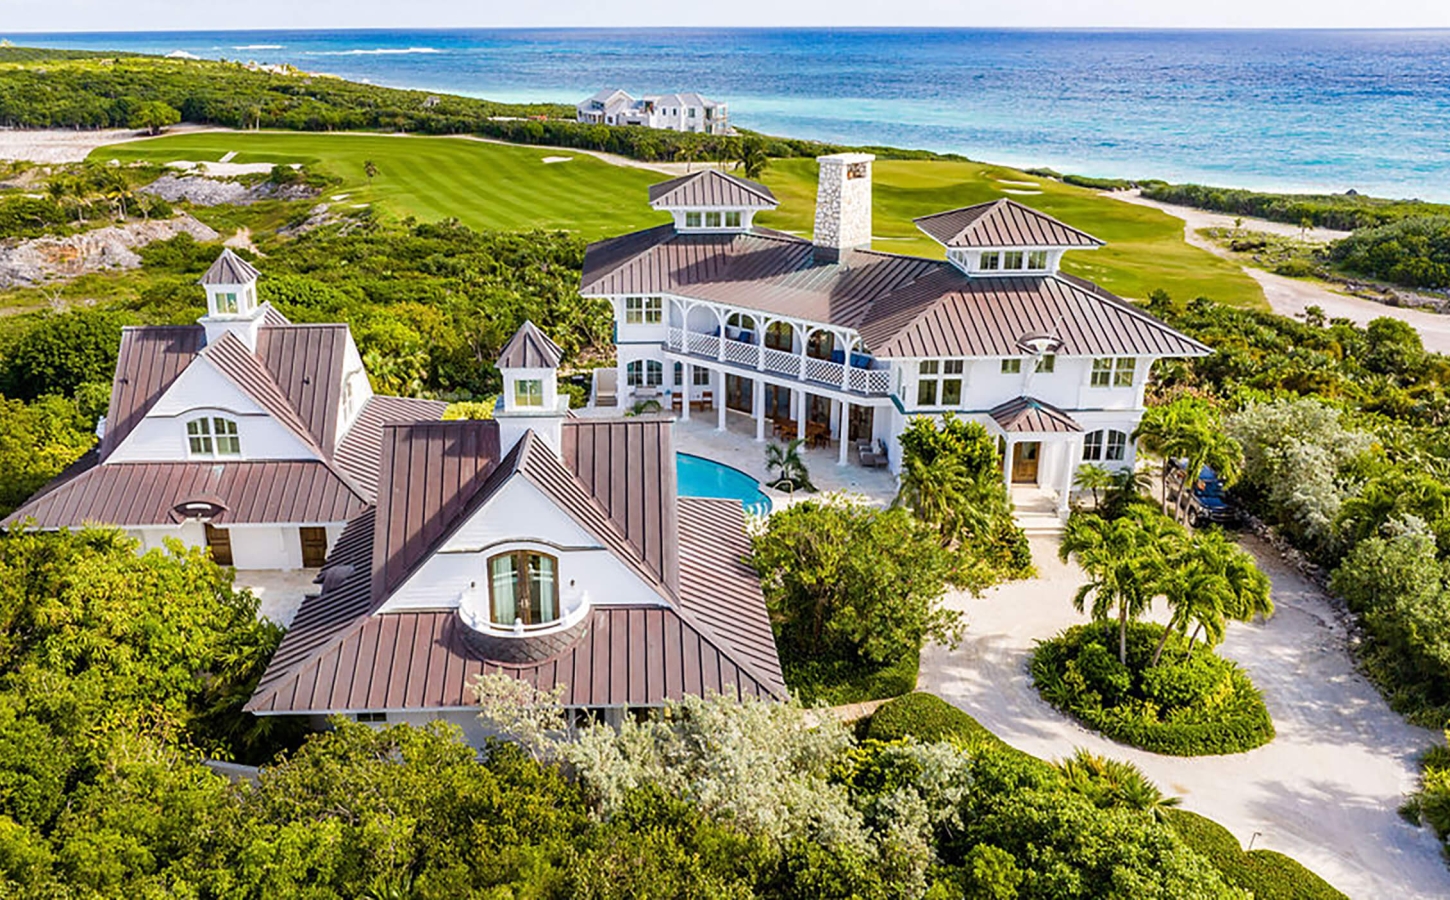 Aerial shot of the some of the beachfront houses at The Abaco Club with the Bahamian sea as a background